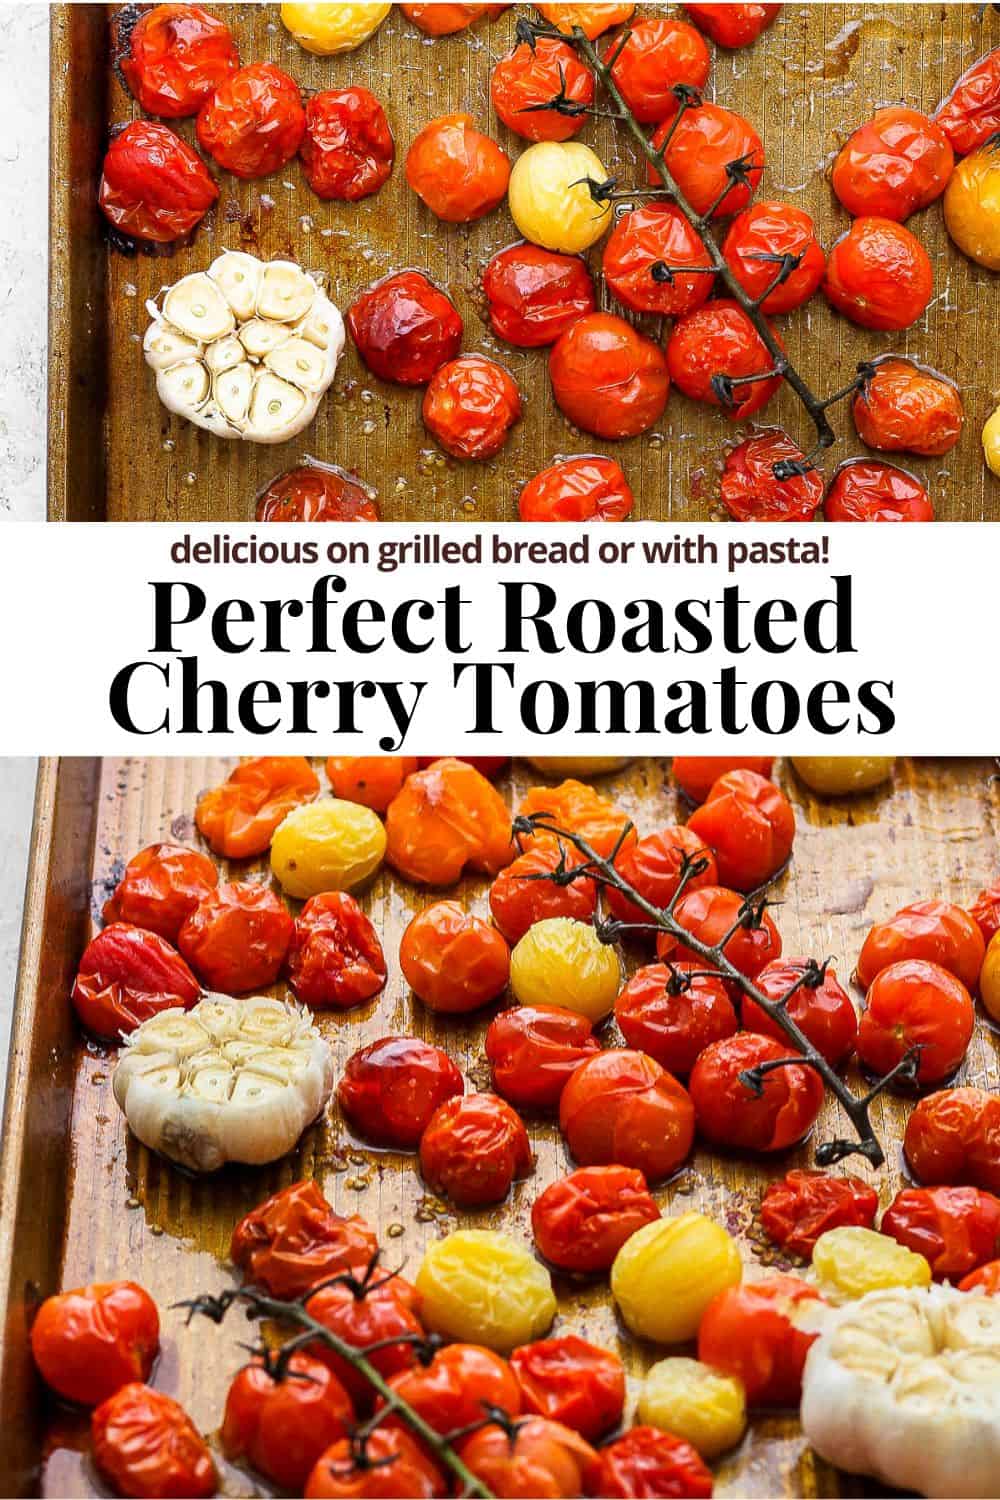 Pinterest image showing roasted cherry tomatoes on a baking sheet with the title "delicious on grilled bred of with pasta. Perfectly roasted cherry tomatoes".